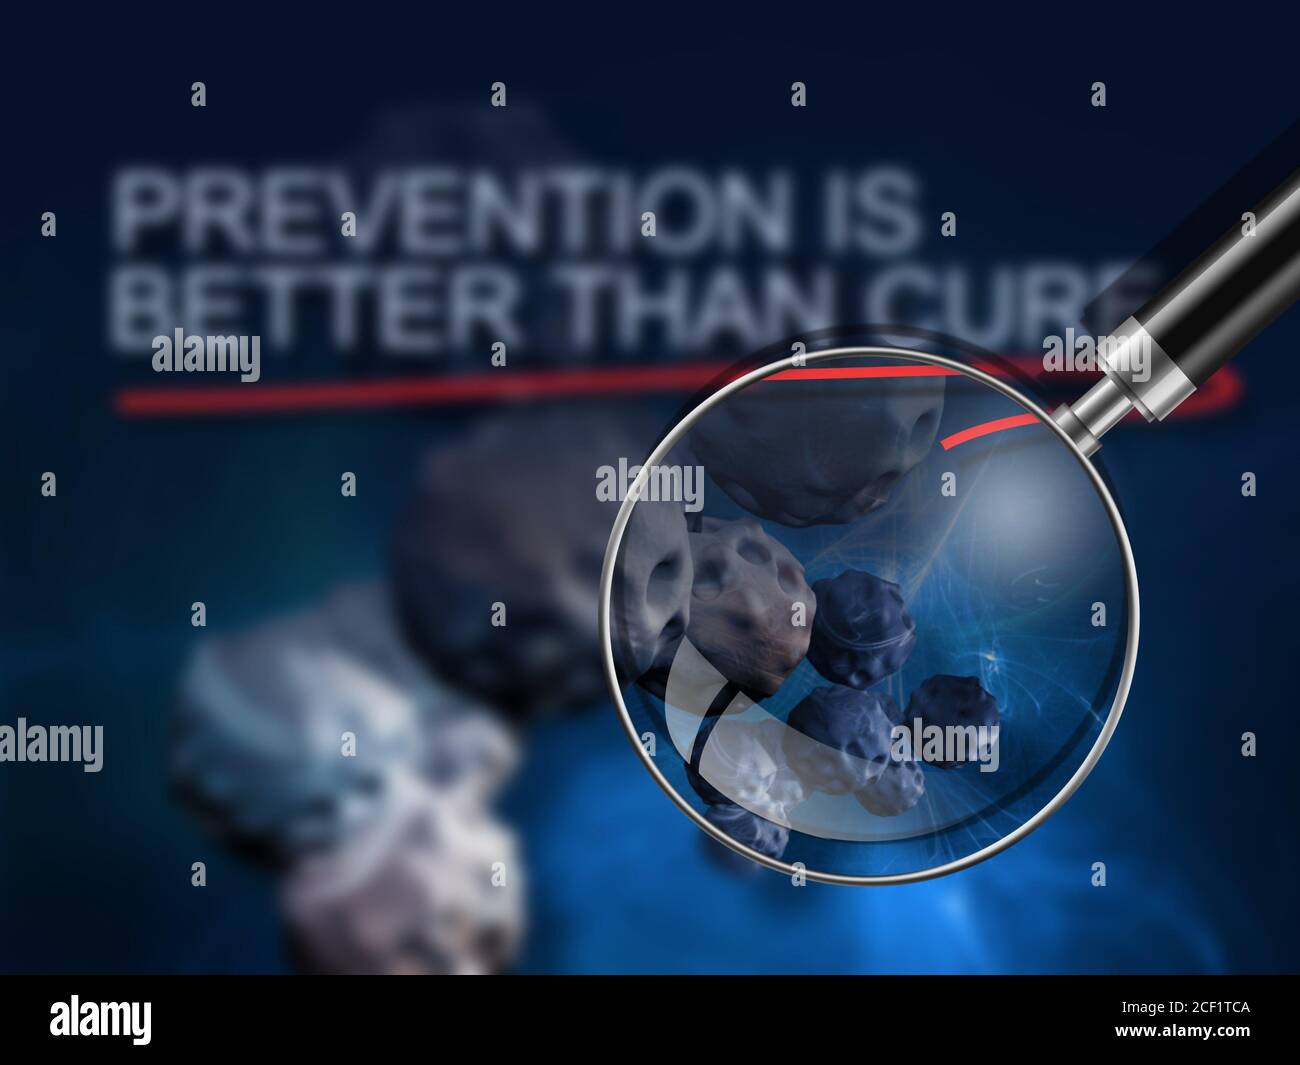 words prevention is better than cure with red line on background of cancer cell image. Stock Photo